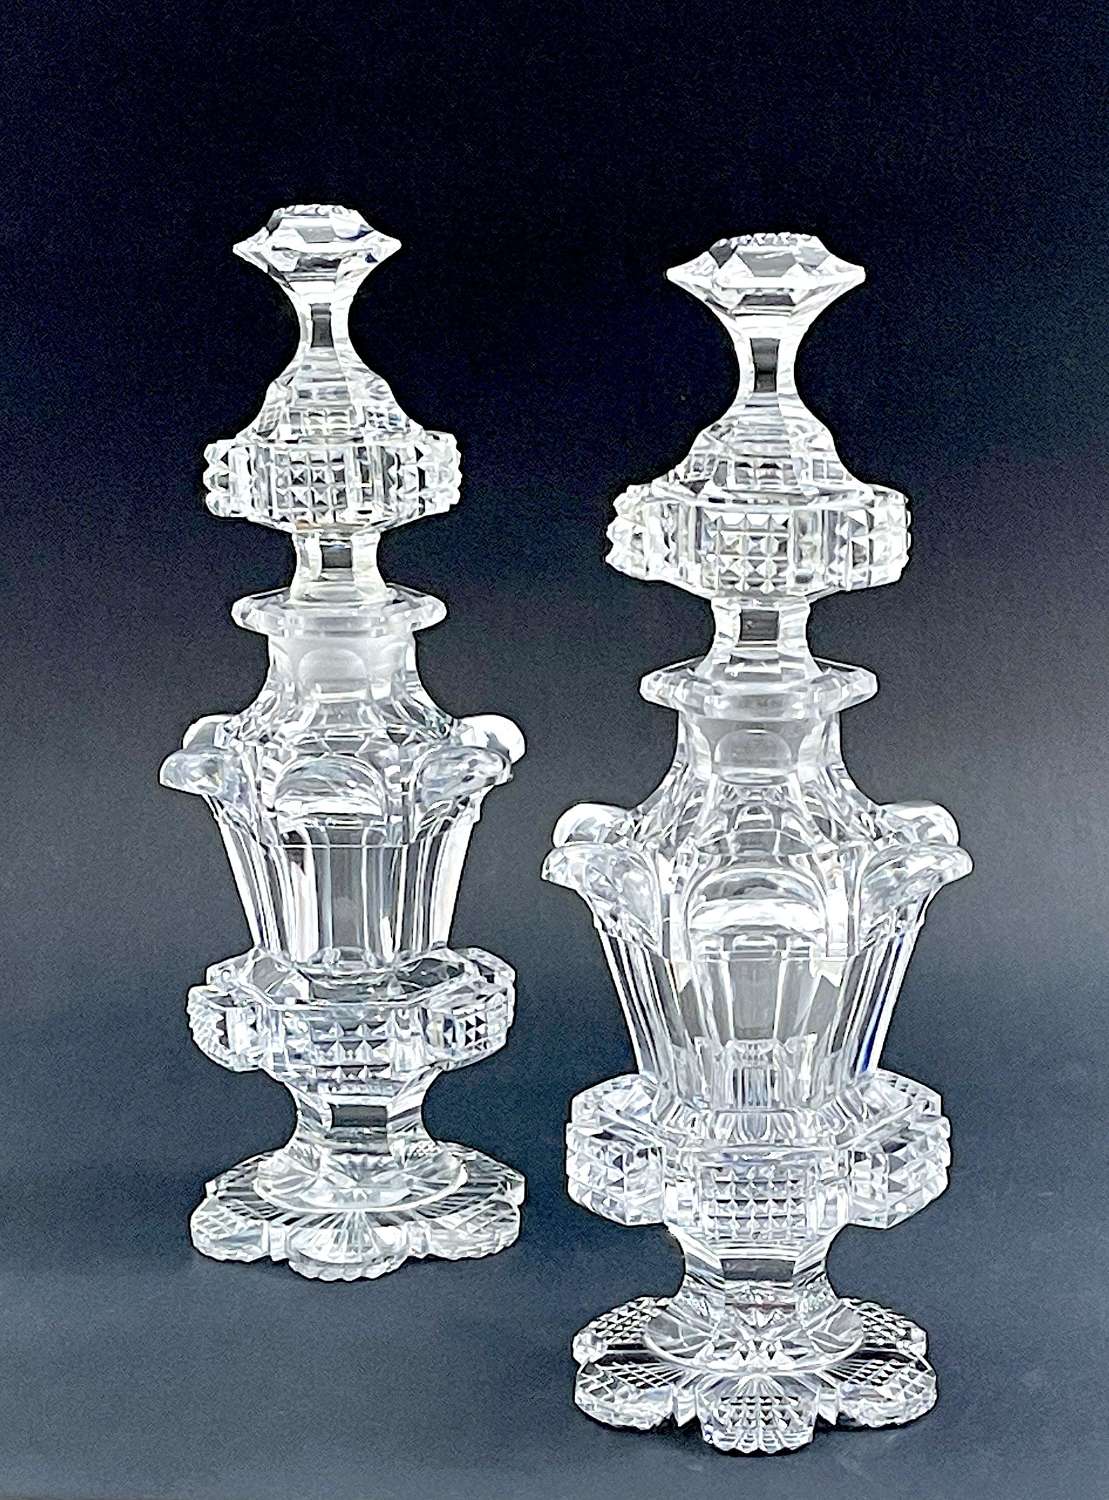 Pair of Fine Large Antique Baccarat Cut Crystal Perfume Bottles